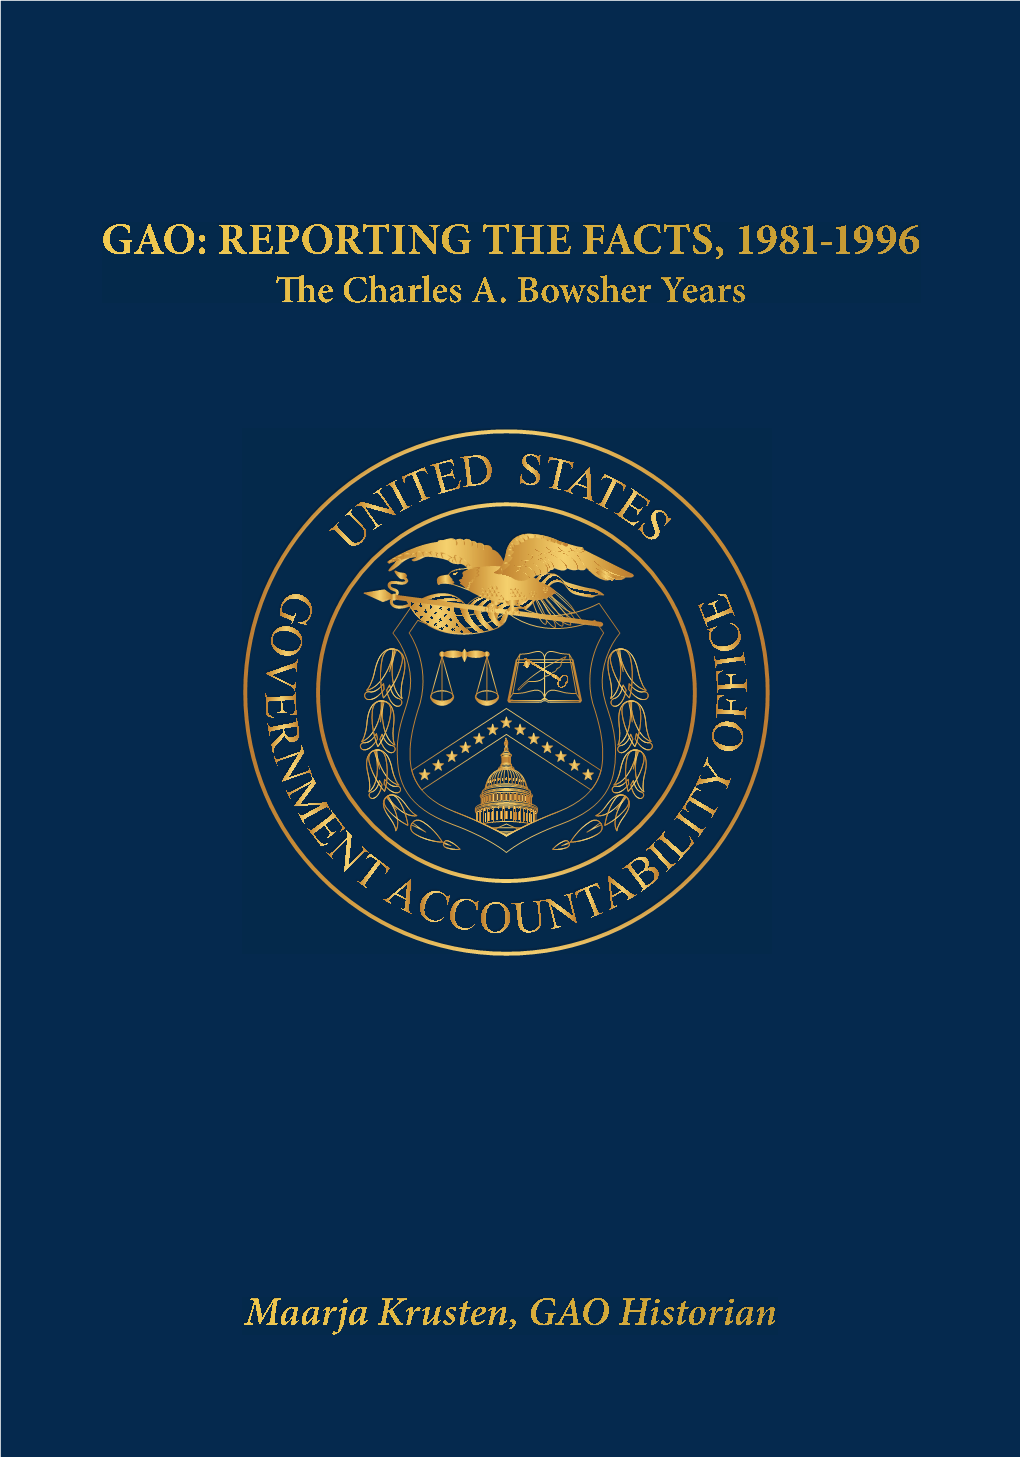 GAO: Reporting the Facts, 1981-1996, the Charles A. Bowsher Years